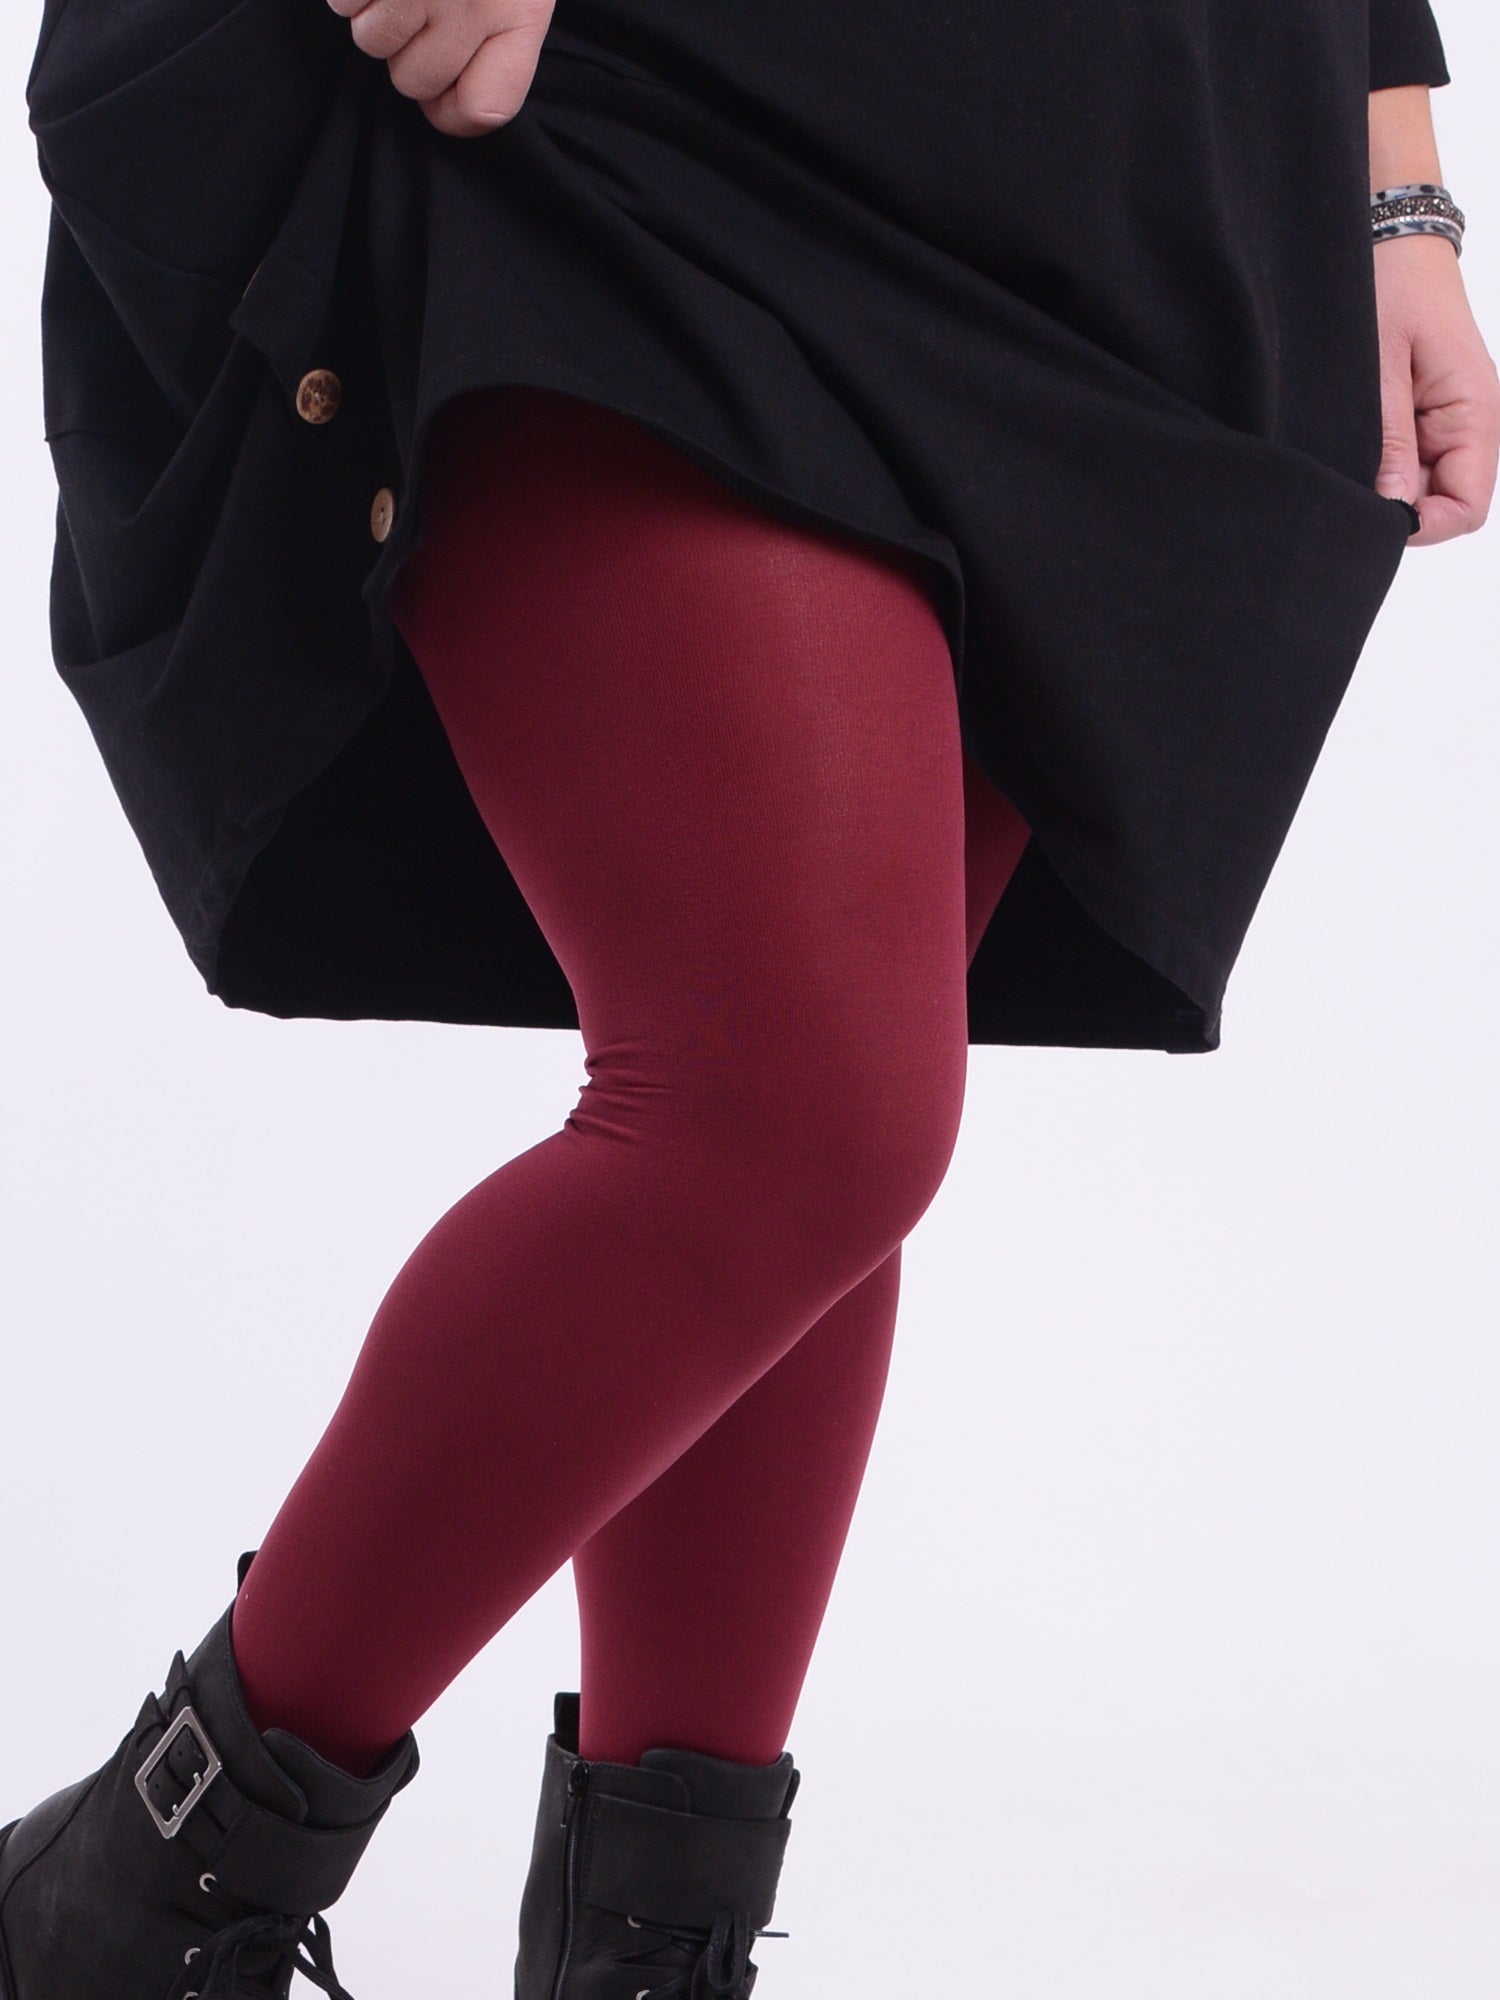 Plus Size Tights, Alternative Clothing, Dress Accessories, Sapphire-burgundy  Lingerie Gift -  Canada